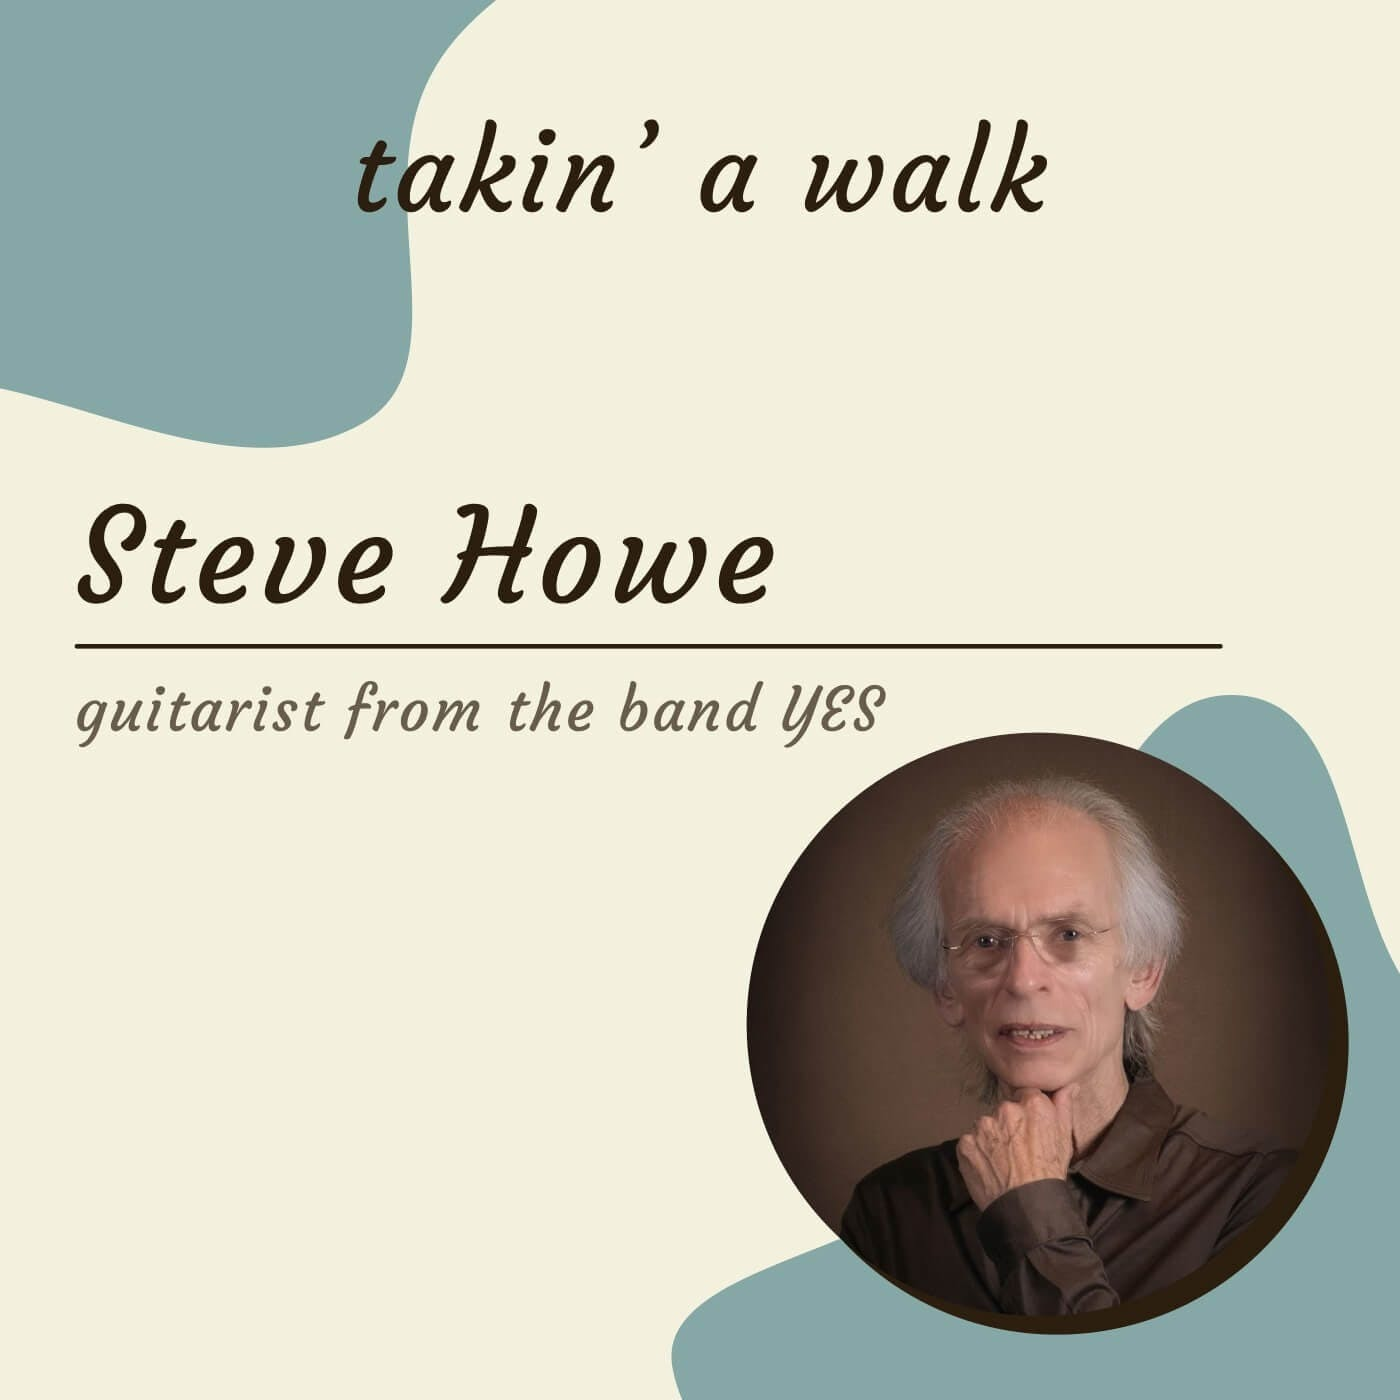 Steve Howe - guitarist from the band Yes